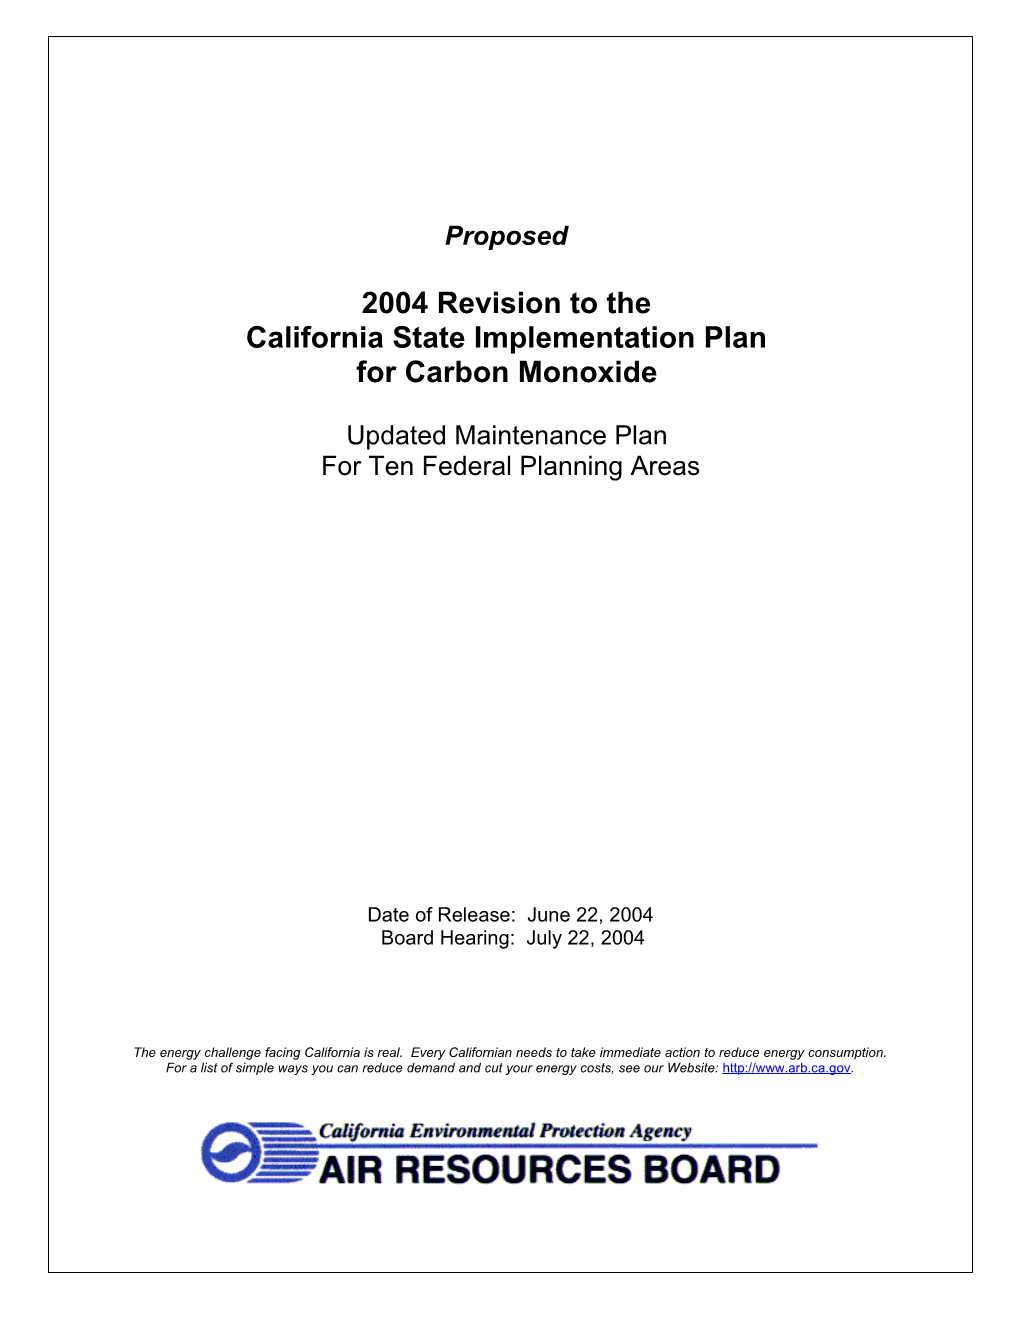 2004 CO Maintenance Plan Update for 10 Planning Areas in California